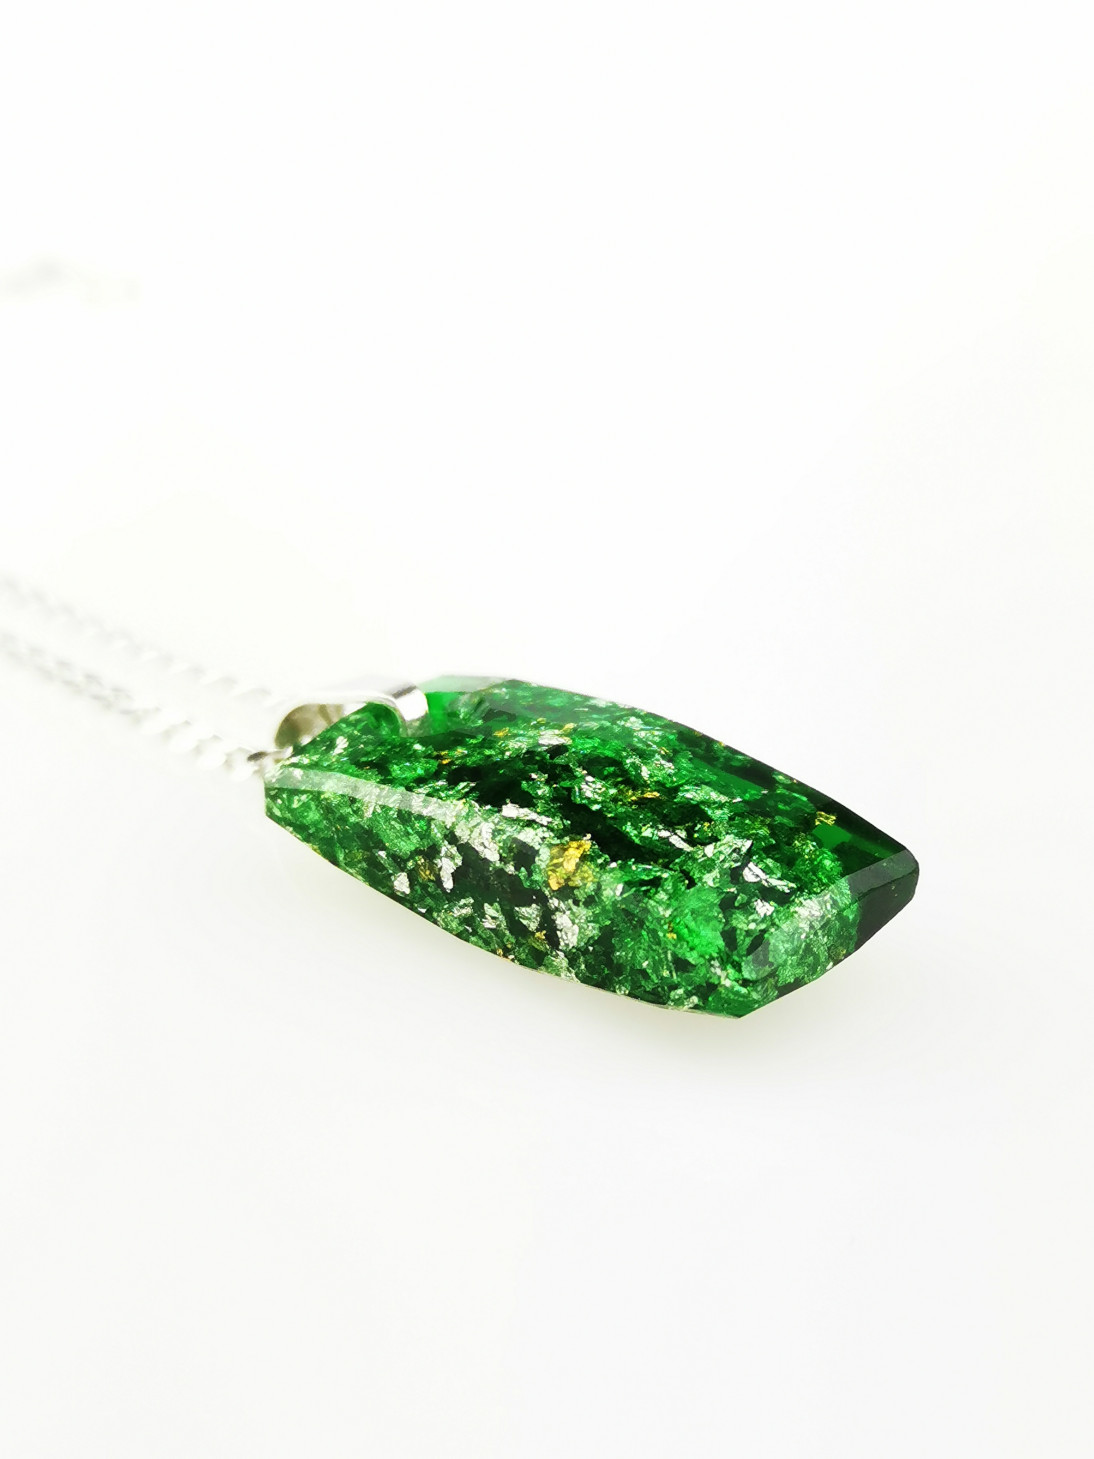 Small Green Cushion Orgone Energy Pendant by OrgoneVibes